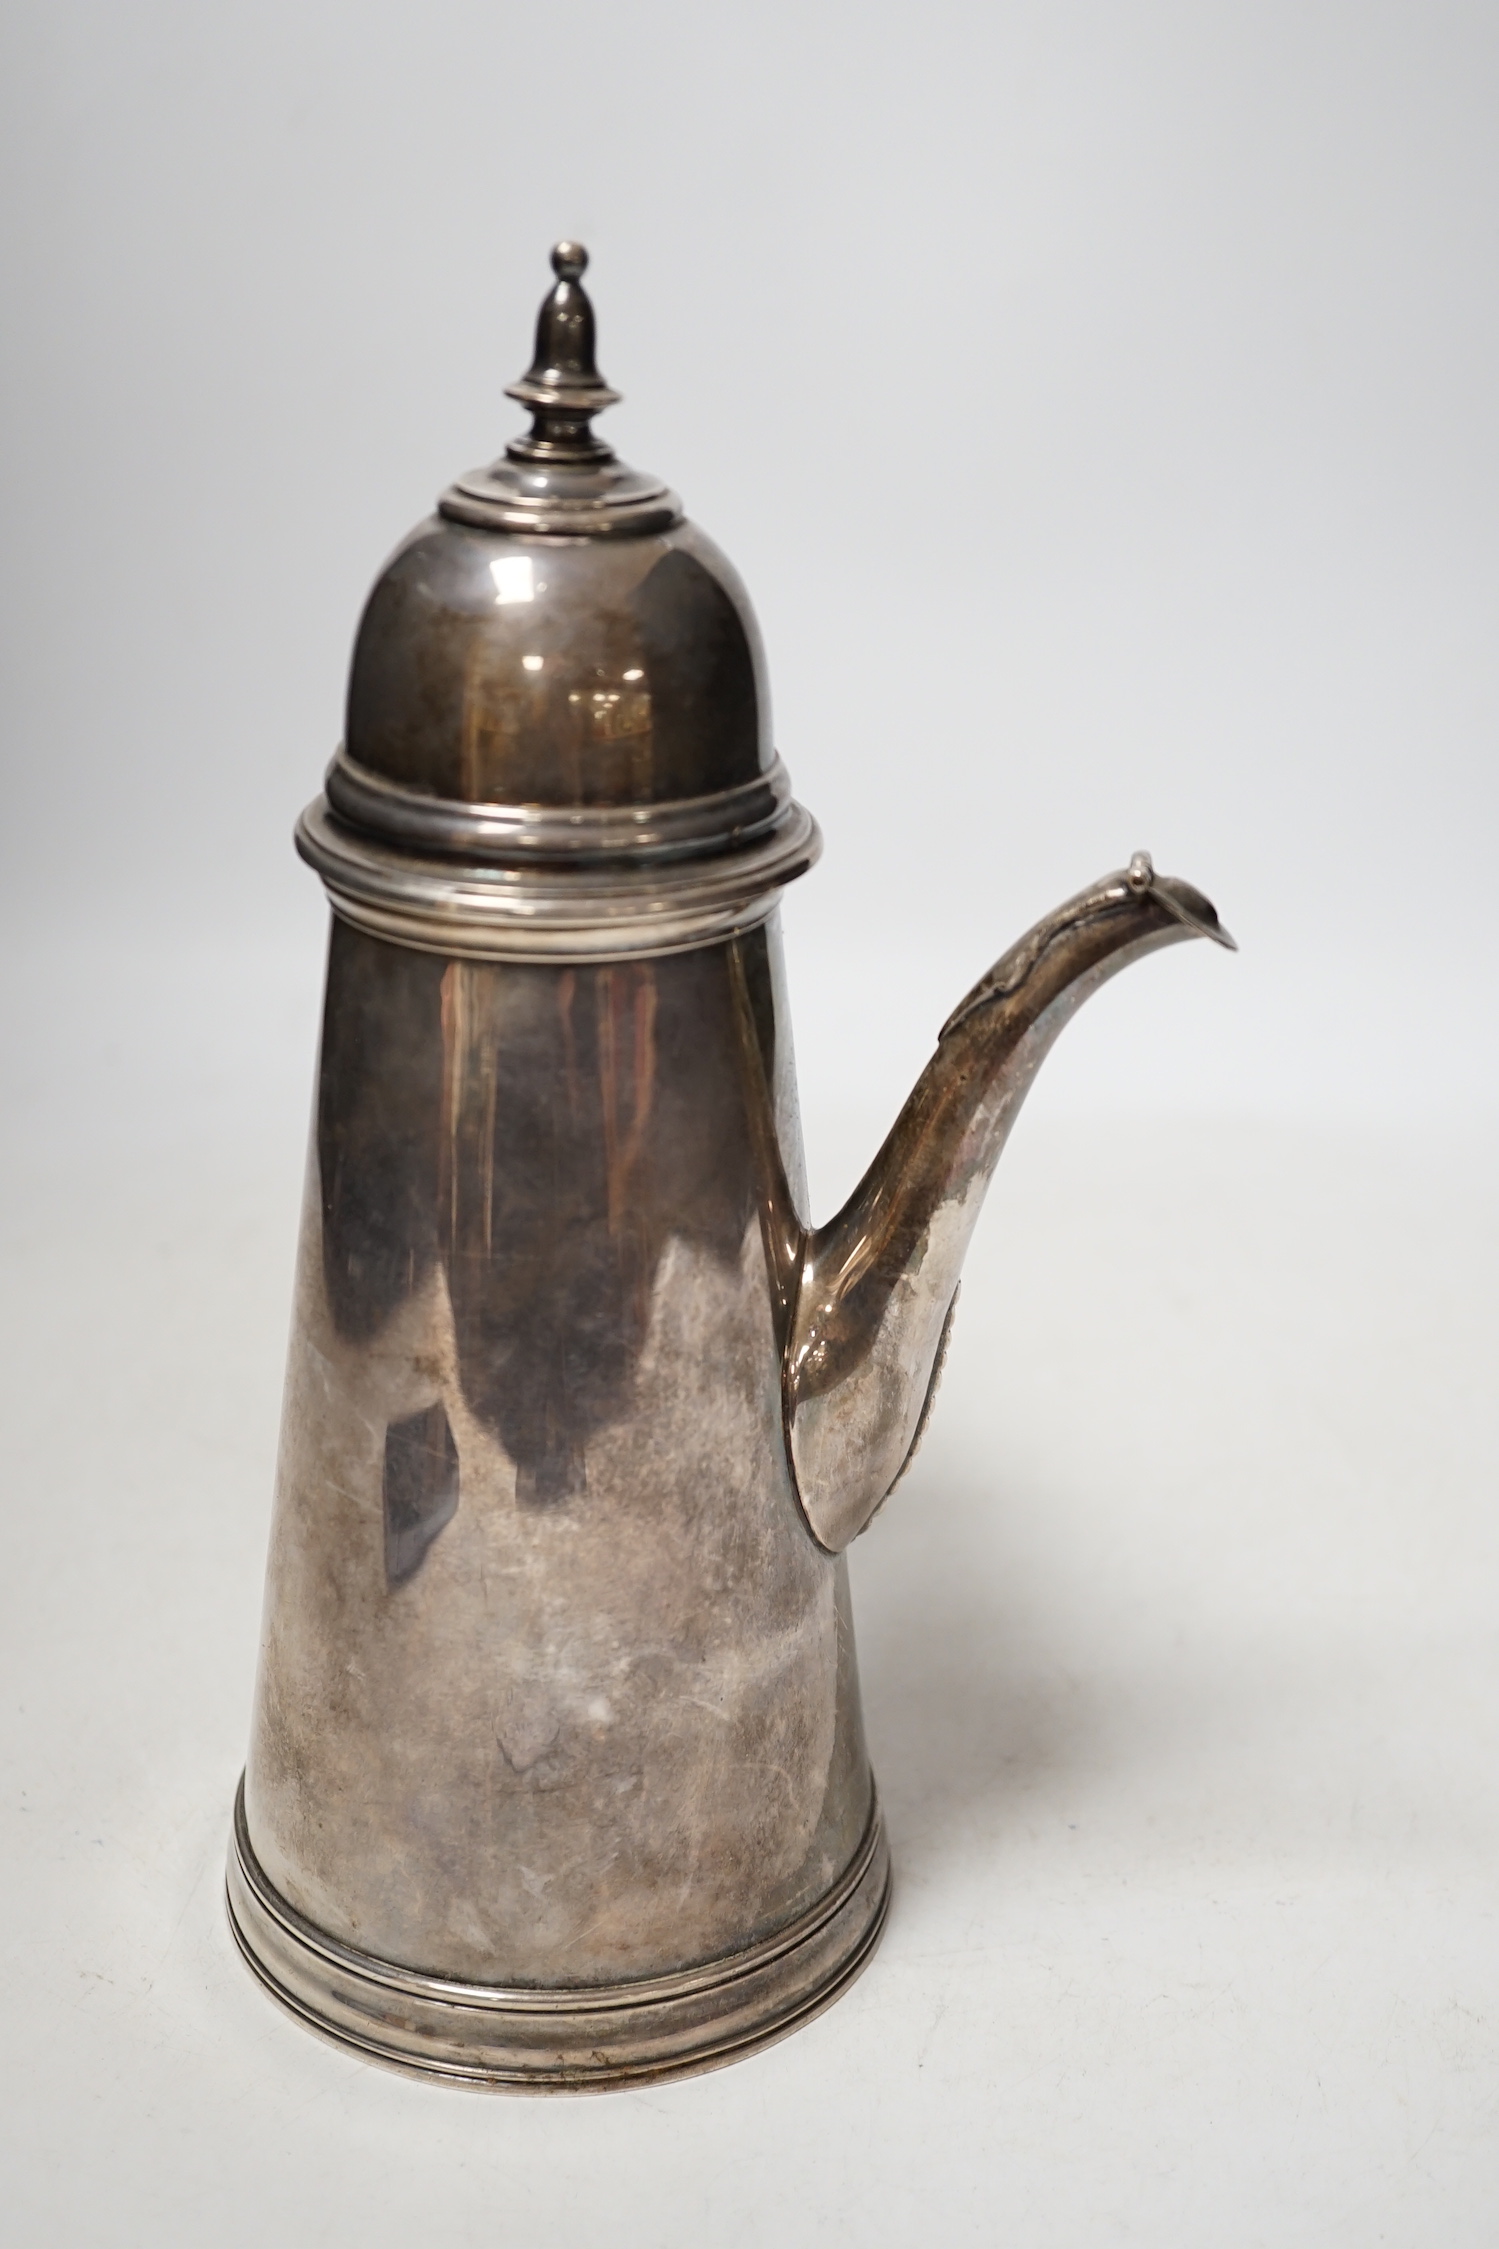 An Edwardian Queen Anne style Brittania standard silver cafe au lait pot by Charles Stuart Harris, London, 1903, height 23.5cm, gross weight 18.9oz.